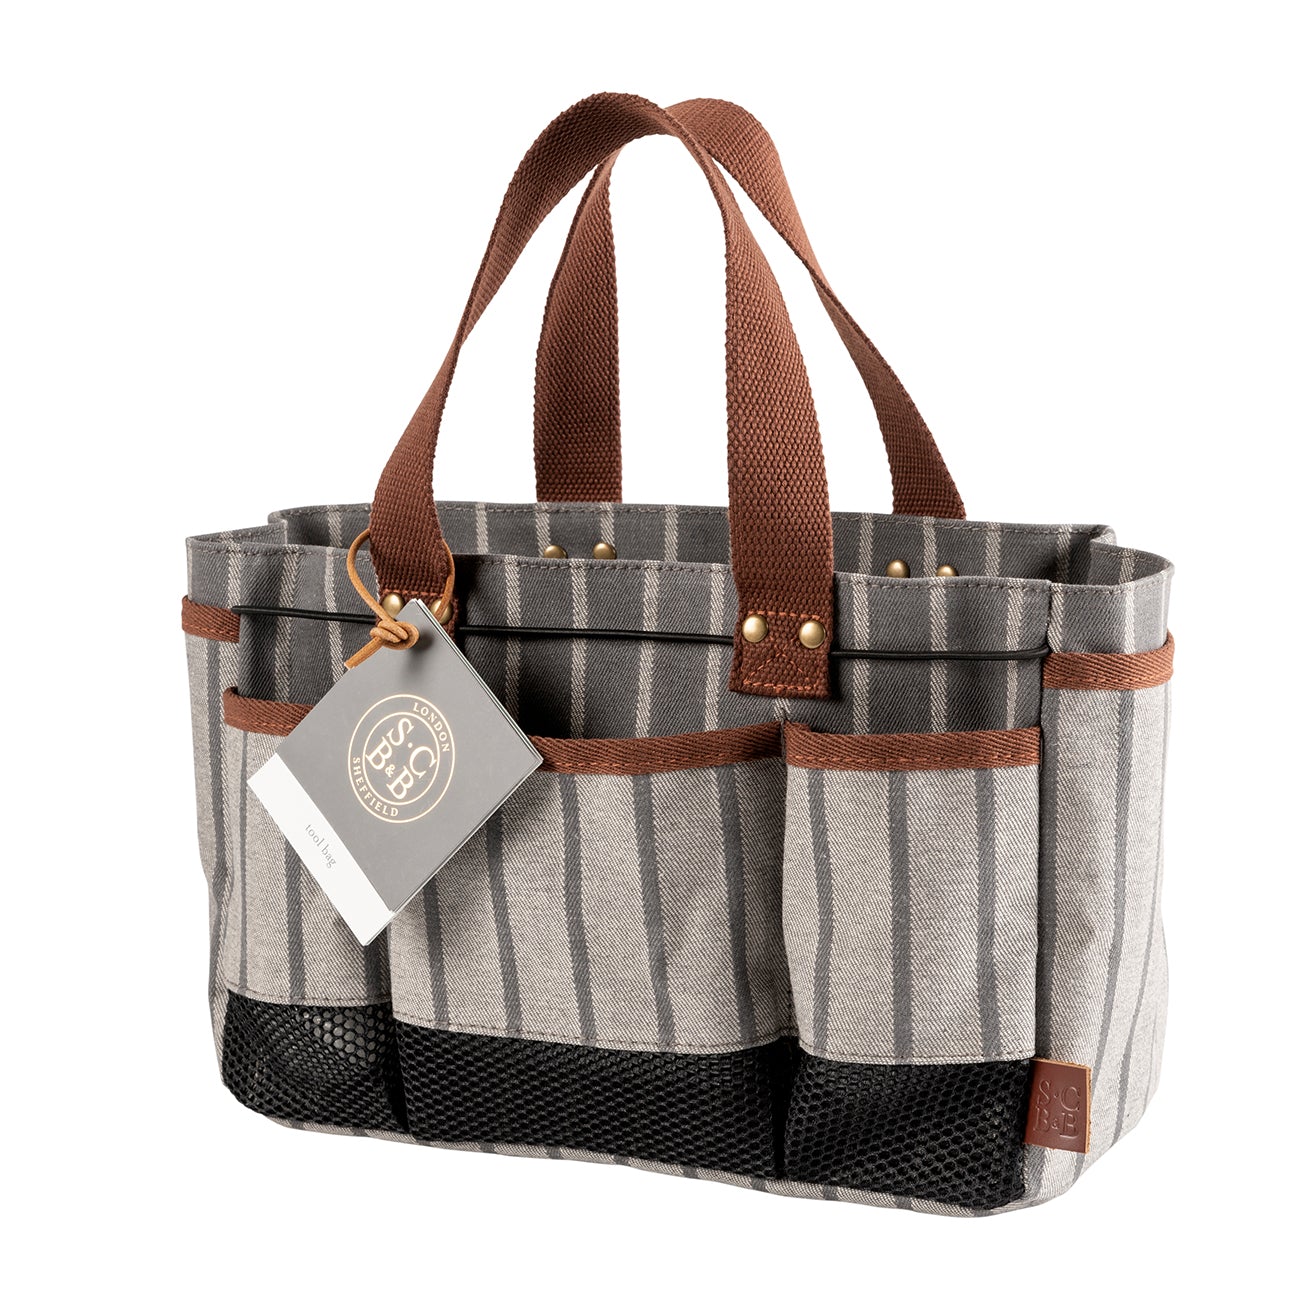 Discerning gardeners can garden in style, with this gorgeous-but-very-practical tool bag in an understated grey ticking stripe. 